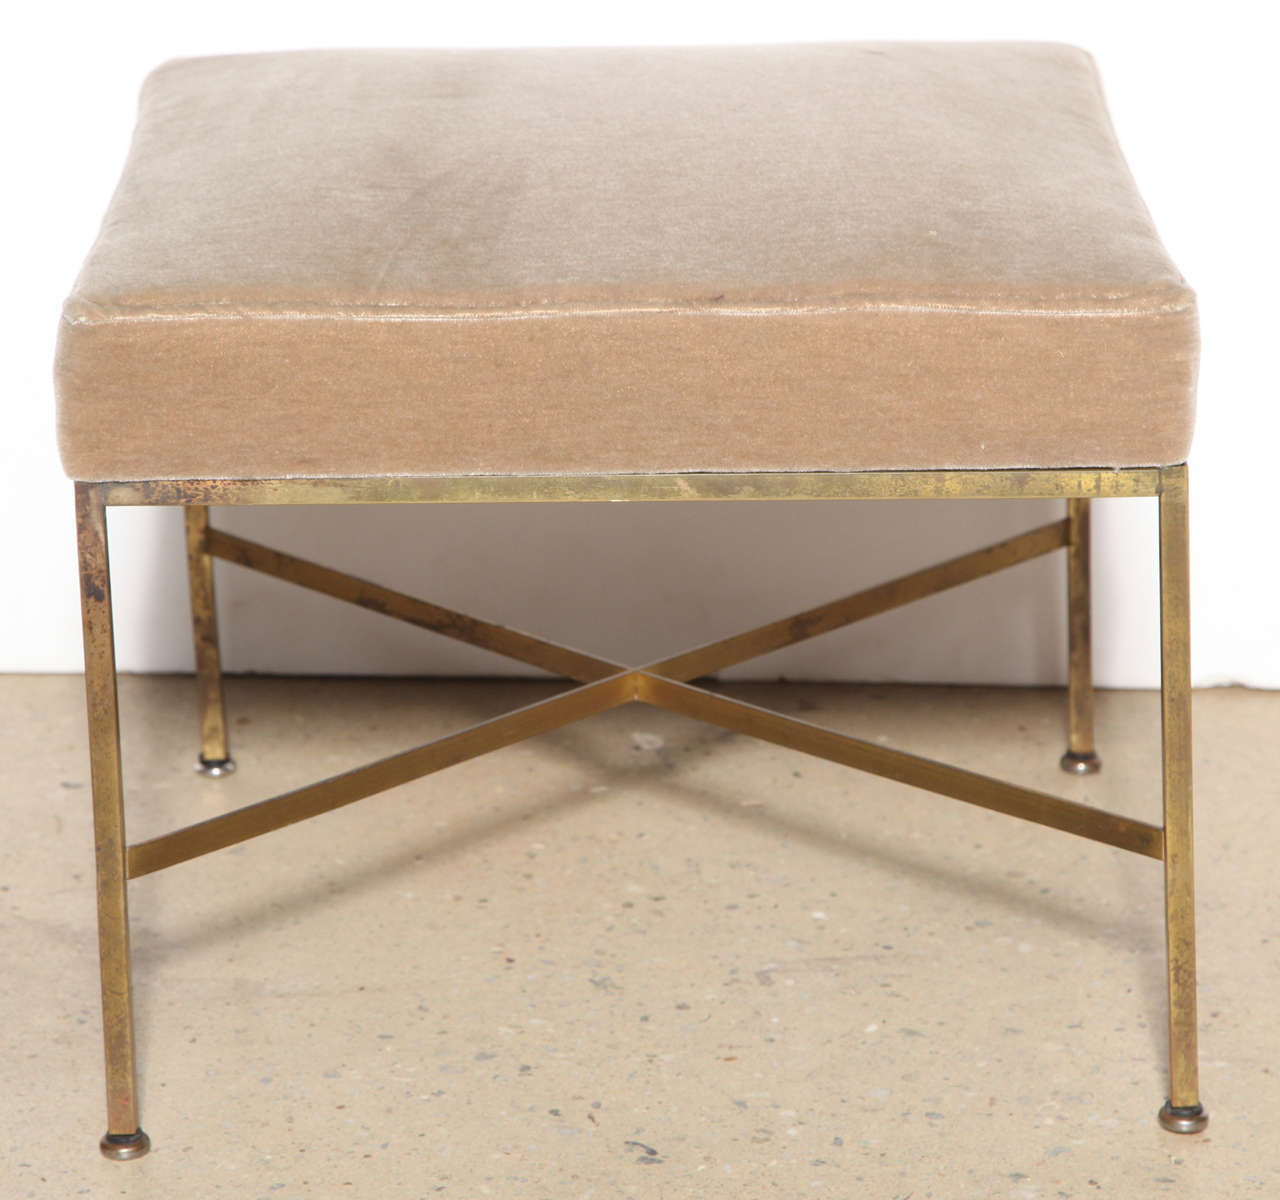 circa 1950 single, square x base Brass Ottoman by Paul McCobb for Directional.  Functional lightweight Stools.  Newly upholstered in Taupe Velvet

*COSMO SUMMER HOURS* 
open Monday-Thursday 12pm-5pm
open Friday-Sunday by chance or prior